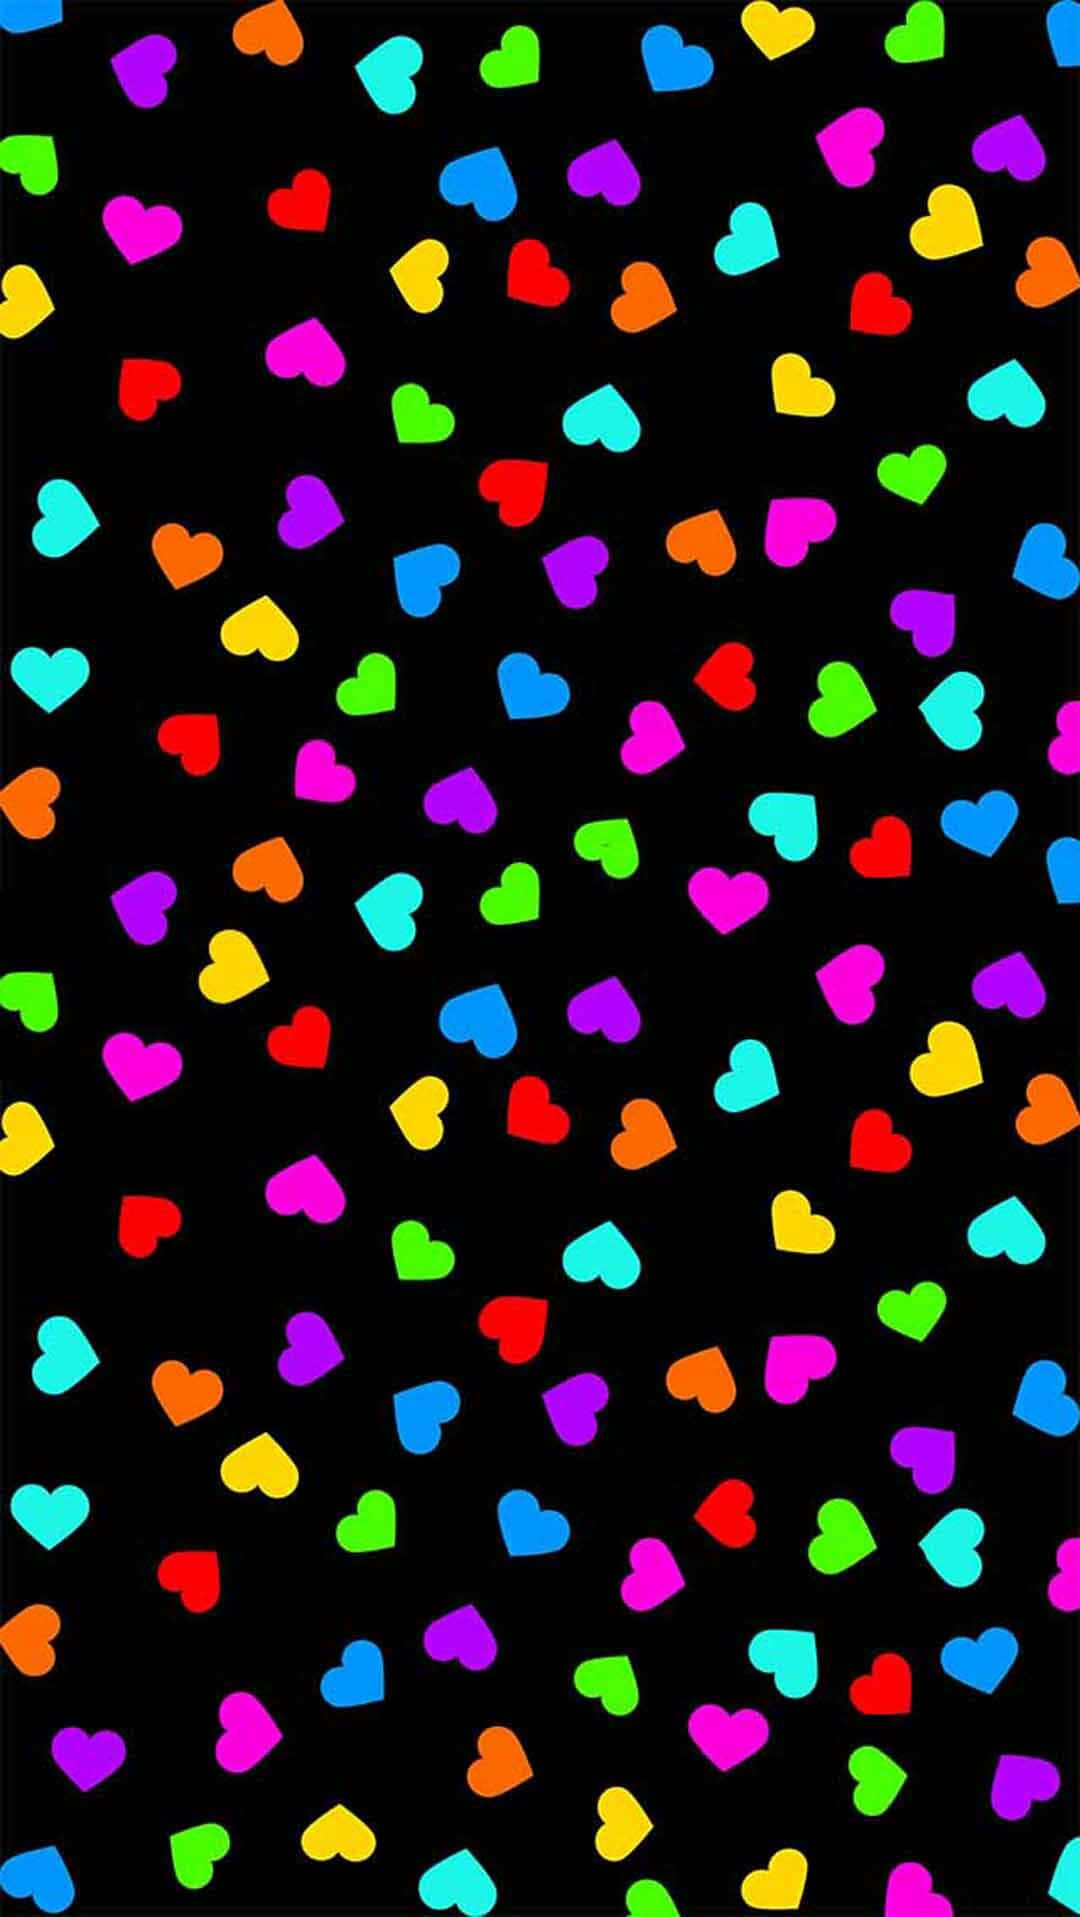 Colorful Hearts Images  Free Download on Freepik